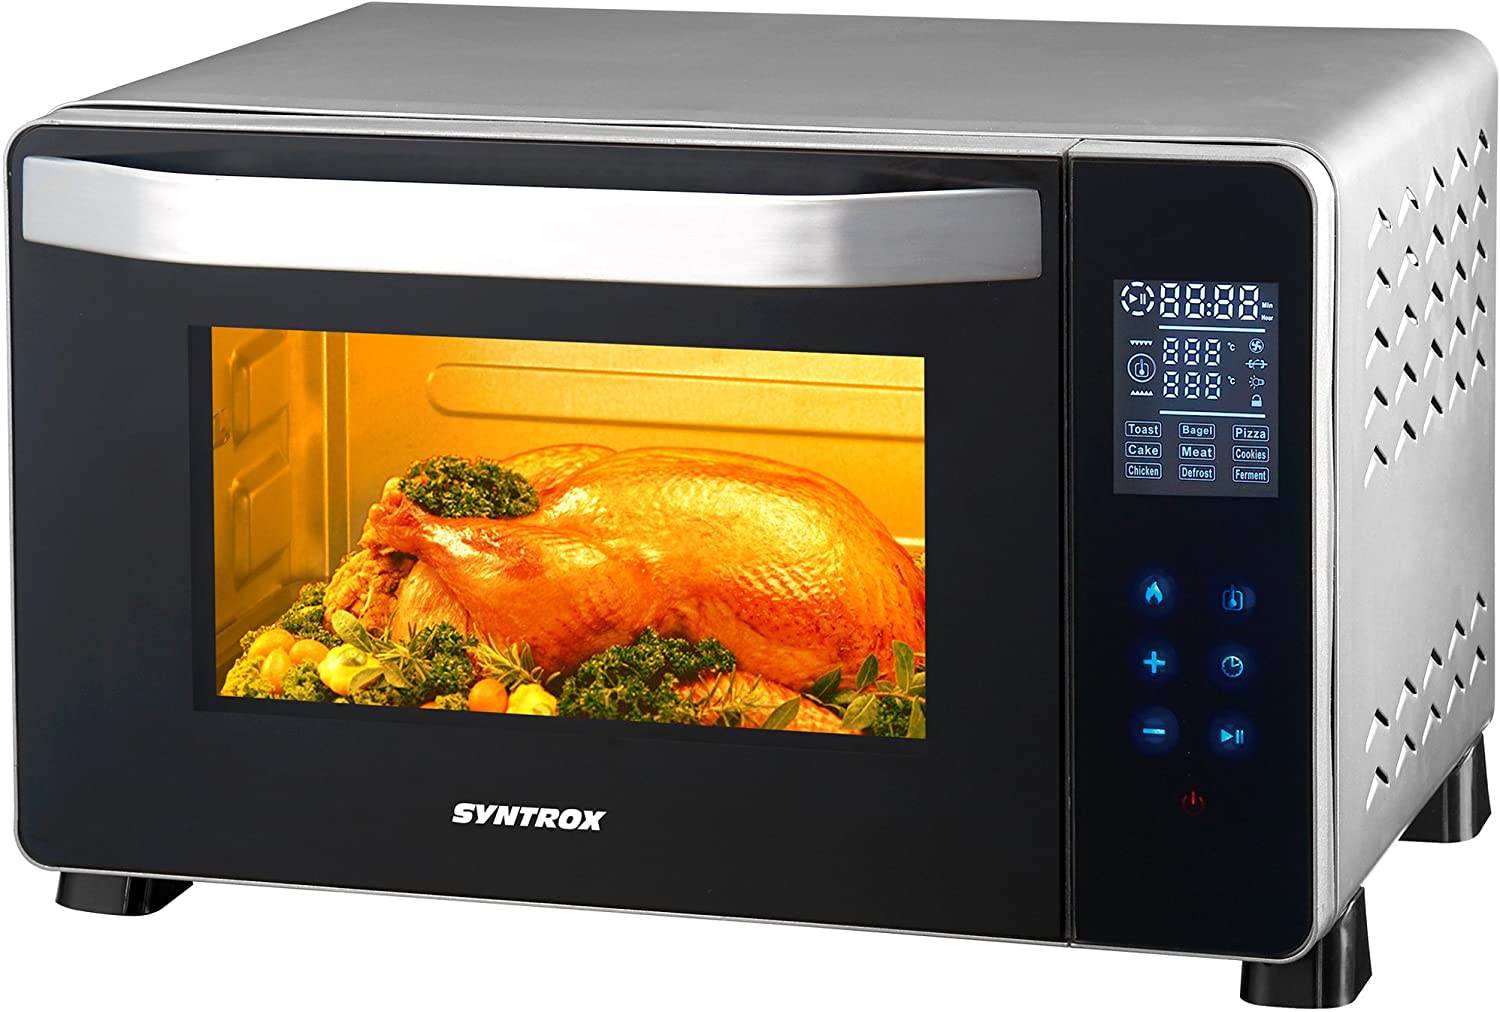 Syntrox Germany 25 Litre Digital Stainless Steel Mini Oven with Convection and Rotisserie Mini Oven Minibac Kofen Pizza Oven 1500 W Bo RO 25L Touch Saltillo